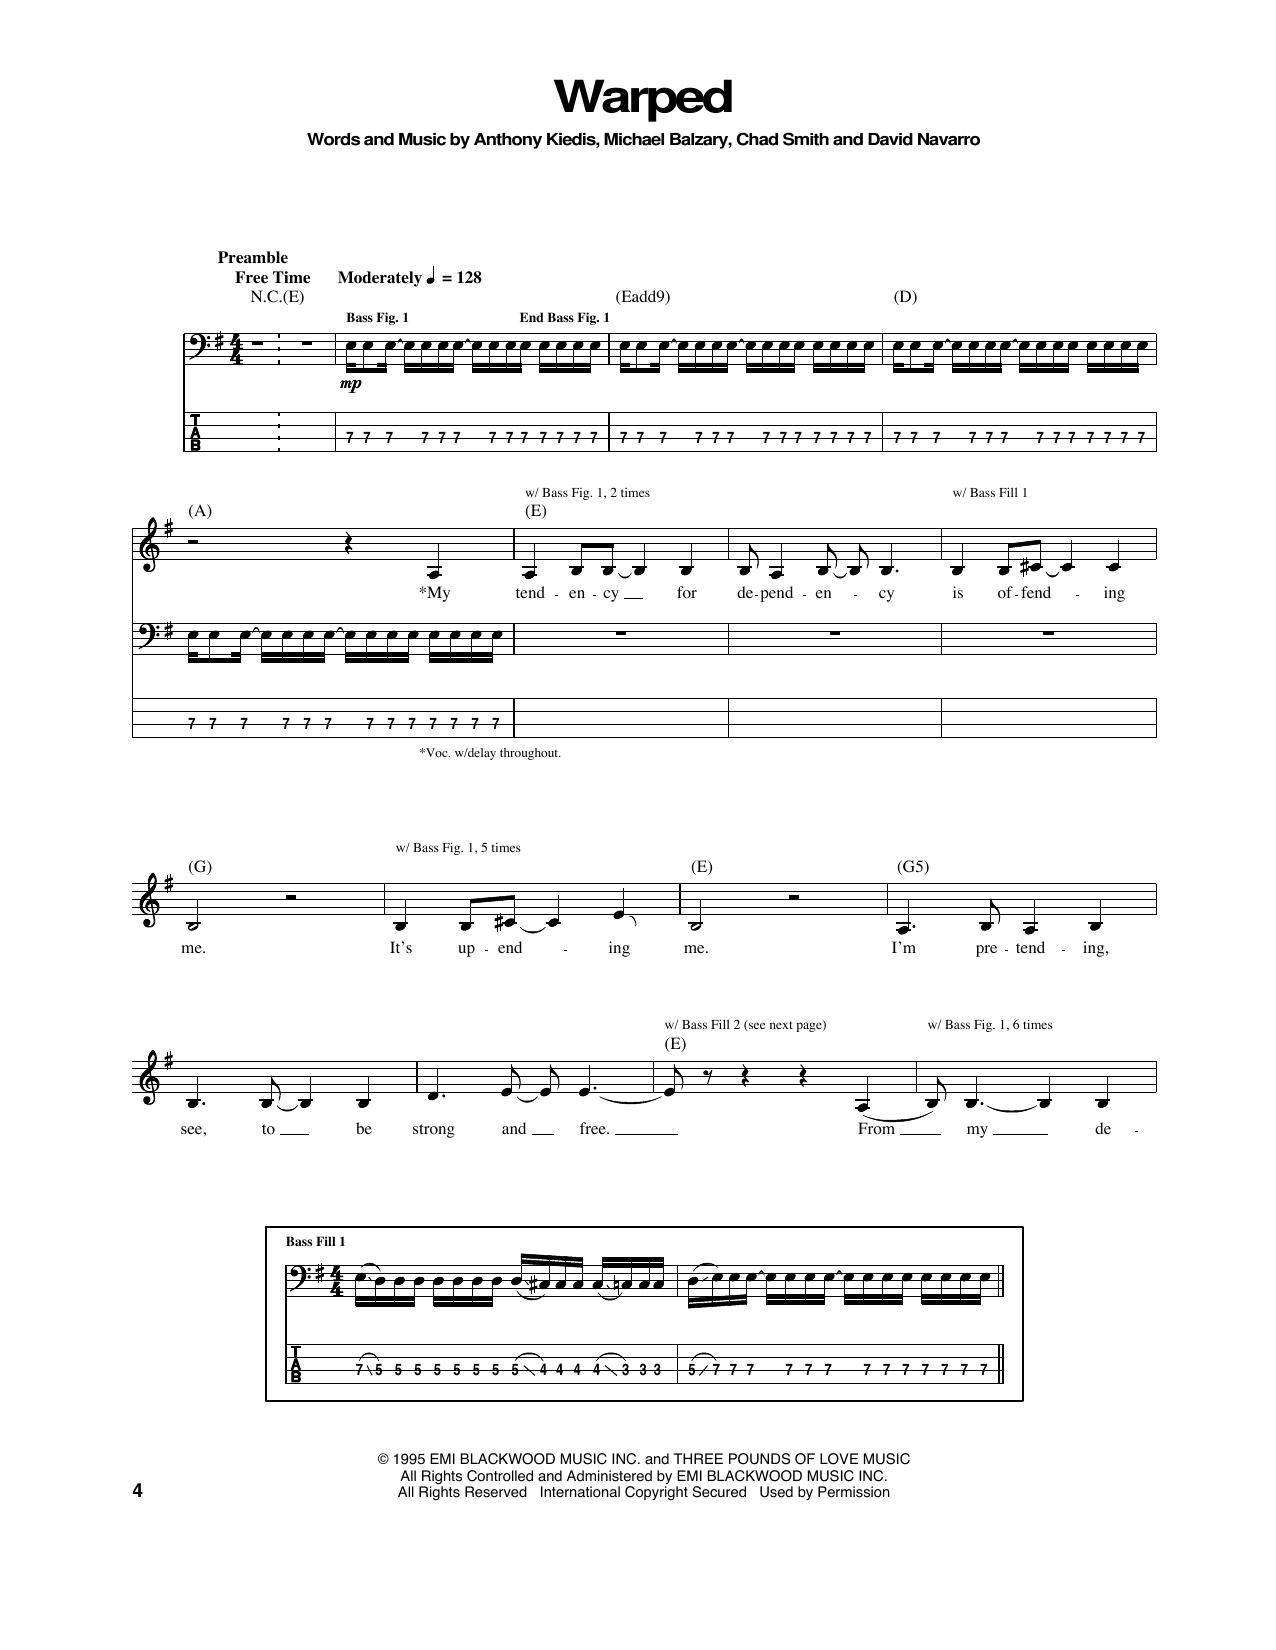 Download Red Hot Chili Peppers Warped Sheet Music